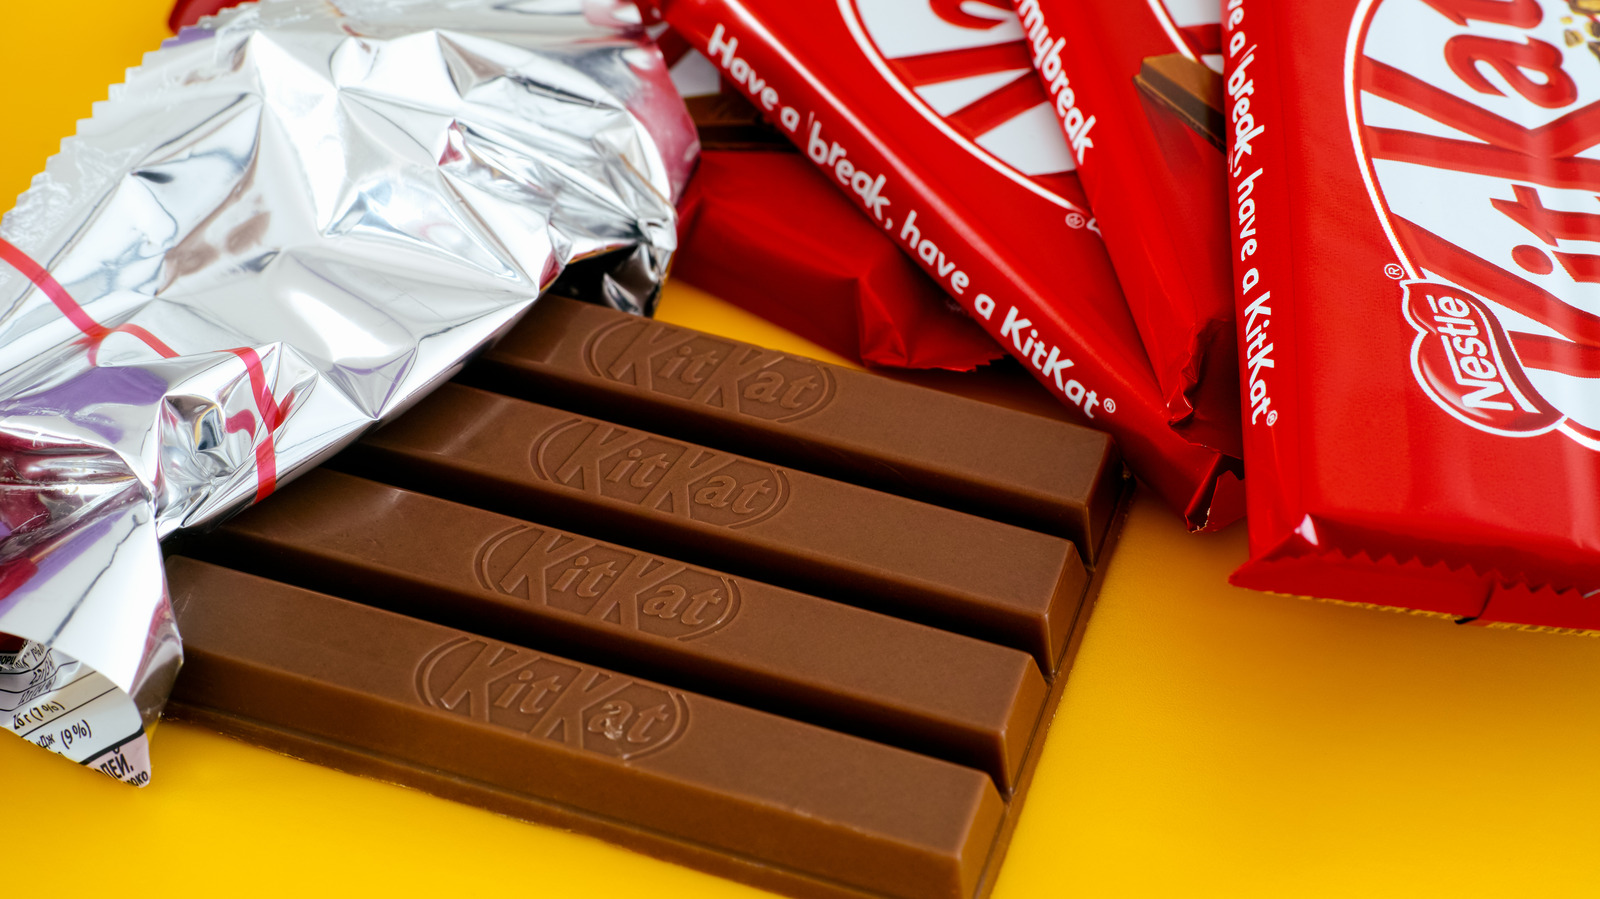 https://www.thedailymeal.com/img/gallery/heres-how-kitkat-really-got-its-name/l-intro-1683906275.jpg